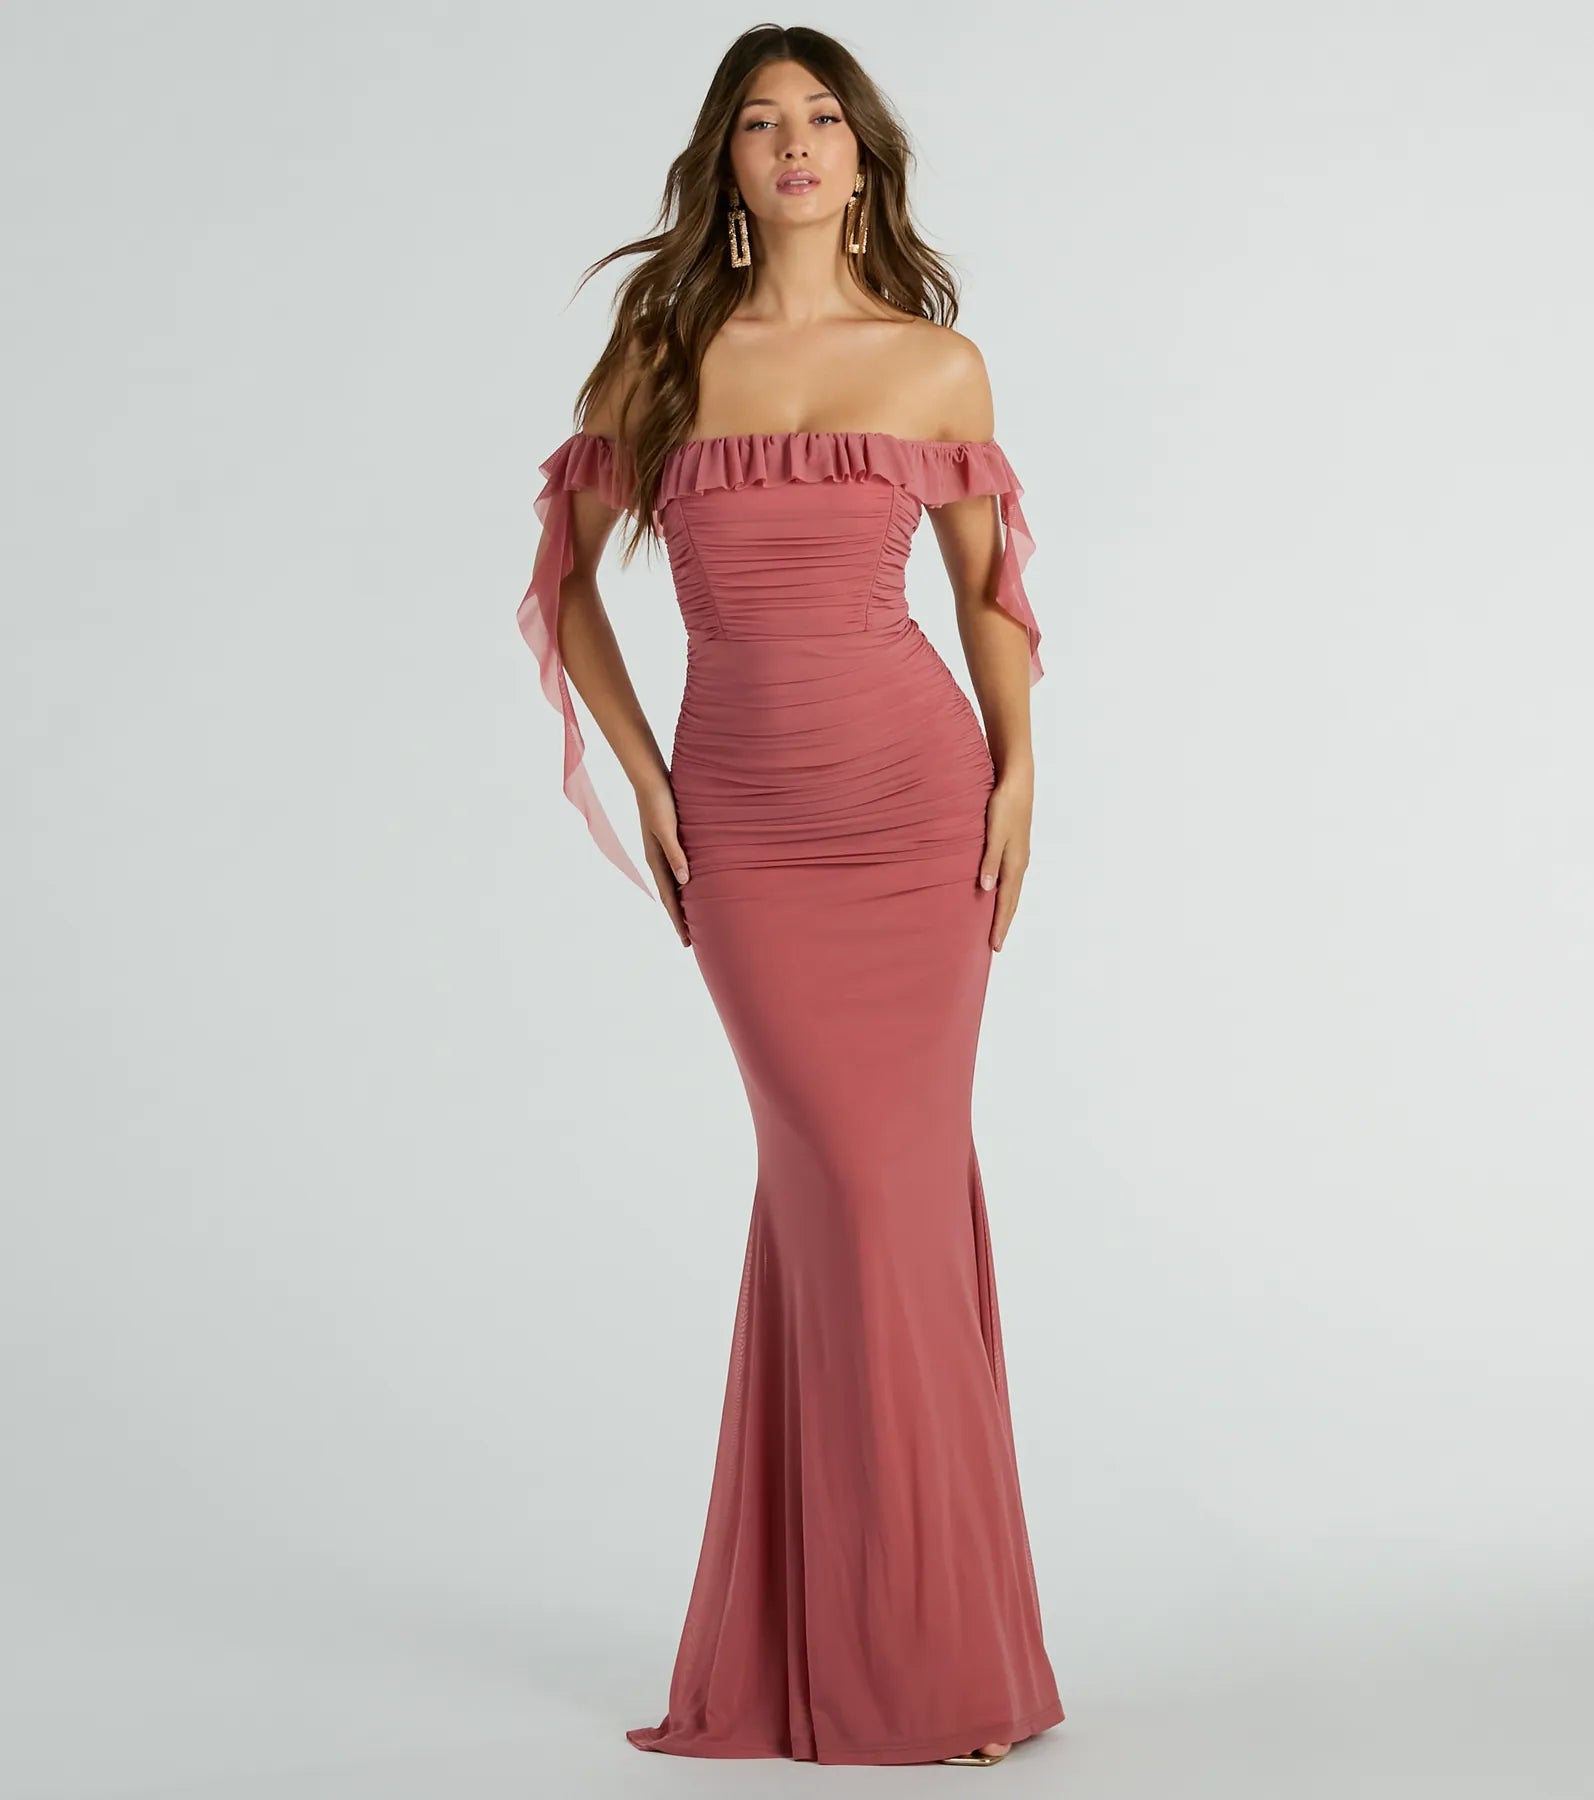 Sexy Sophisticated Off the Shoulder Knit Mesh Stretchy Ruched Mermaid Maxi Dress With Ruffles